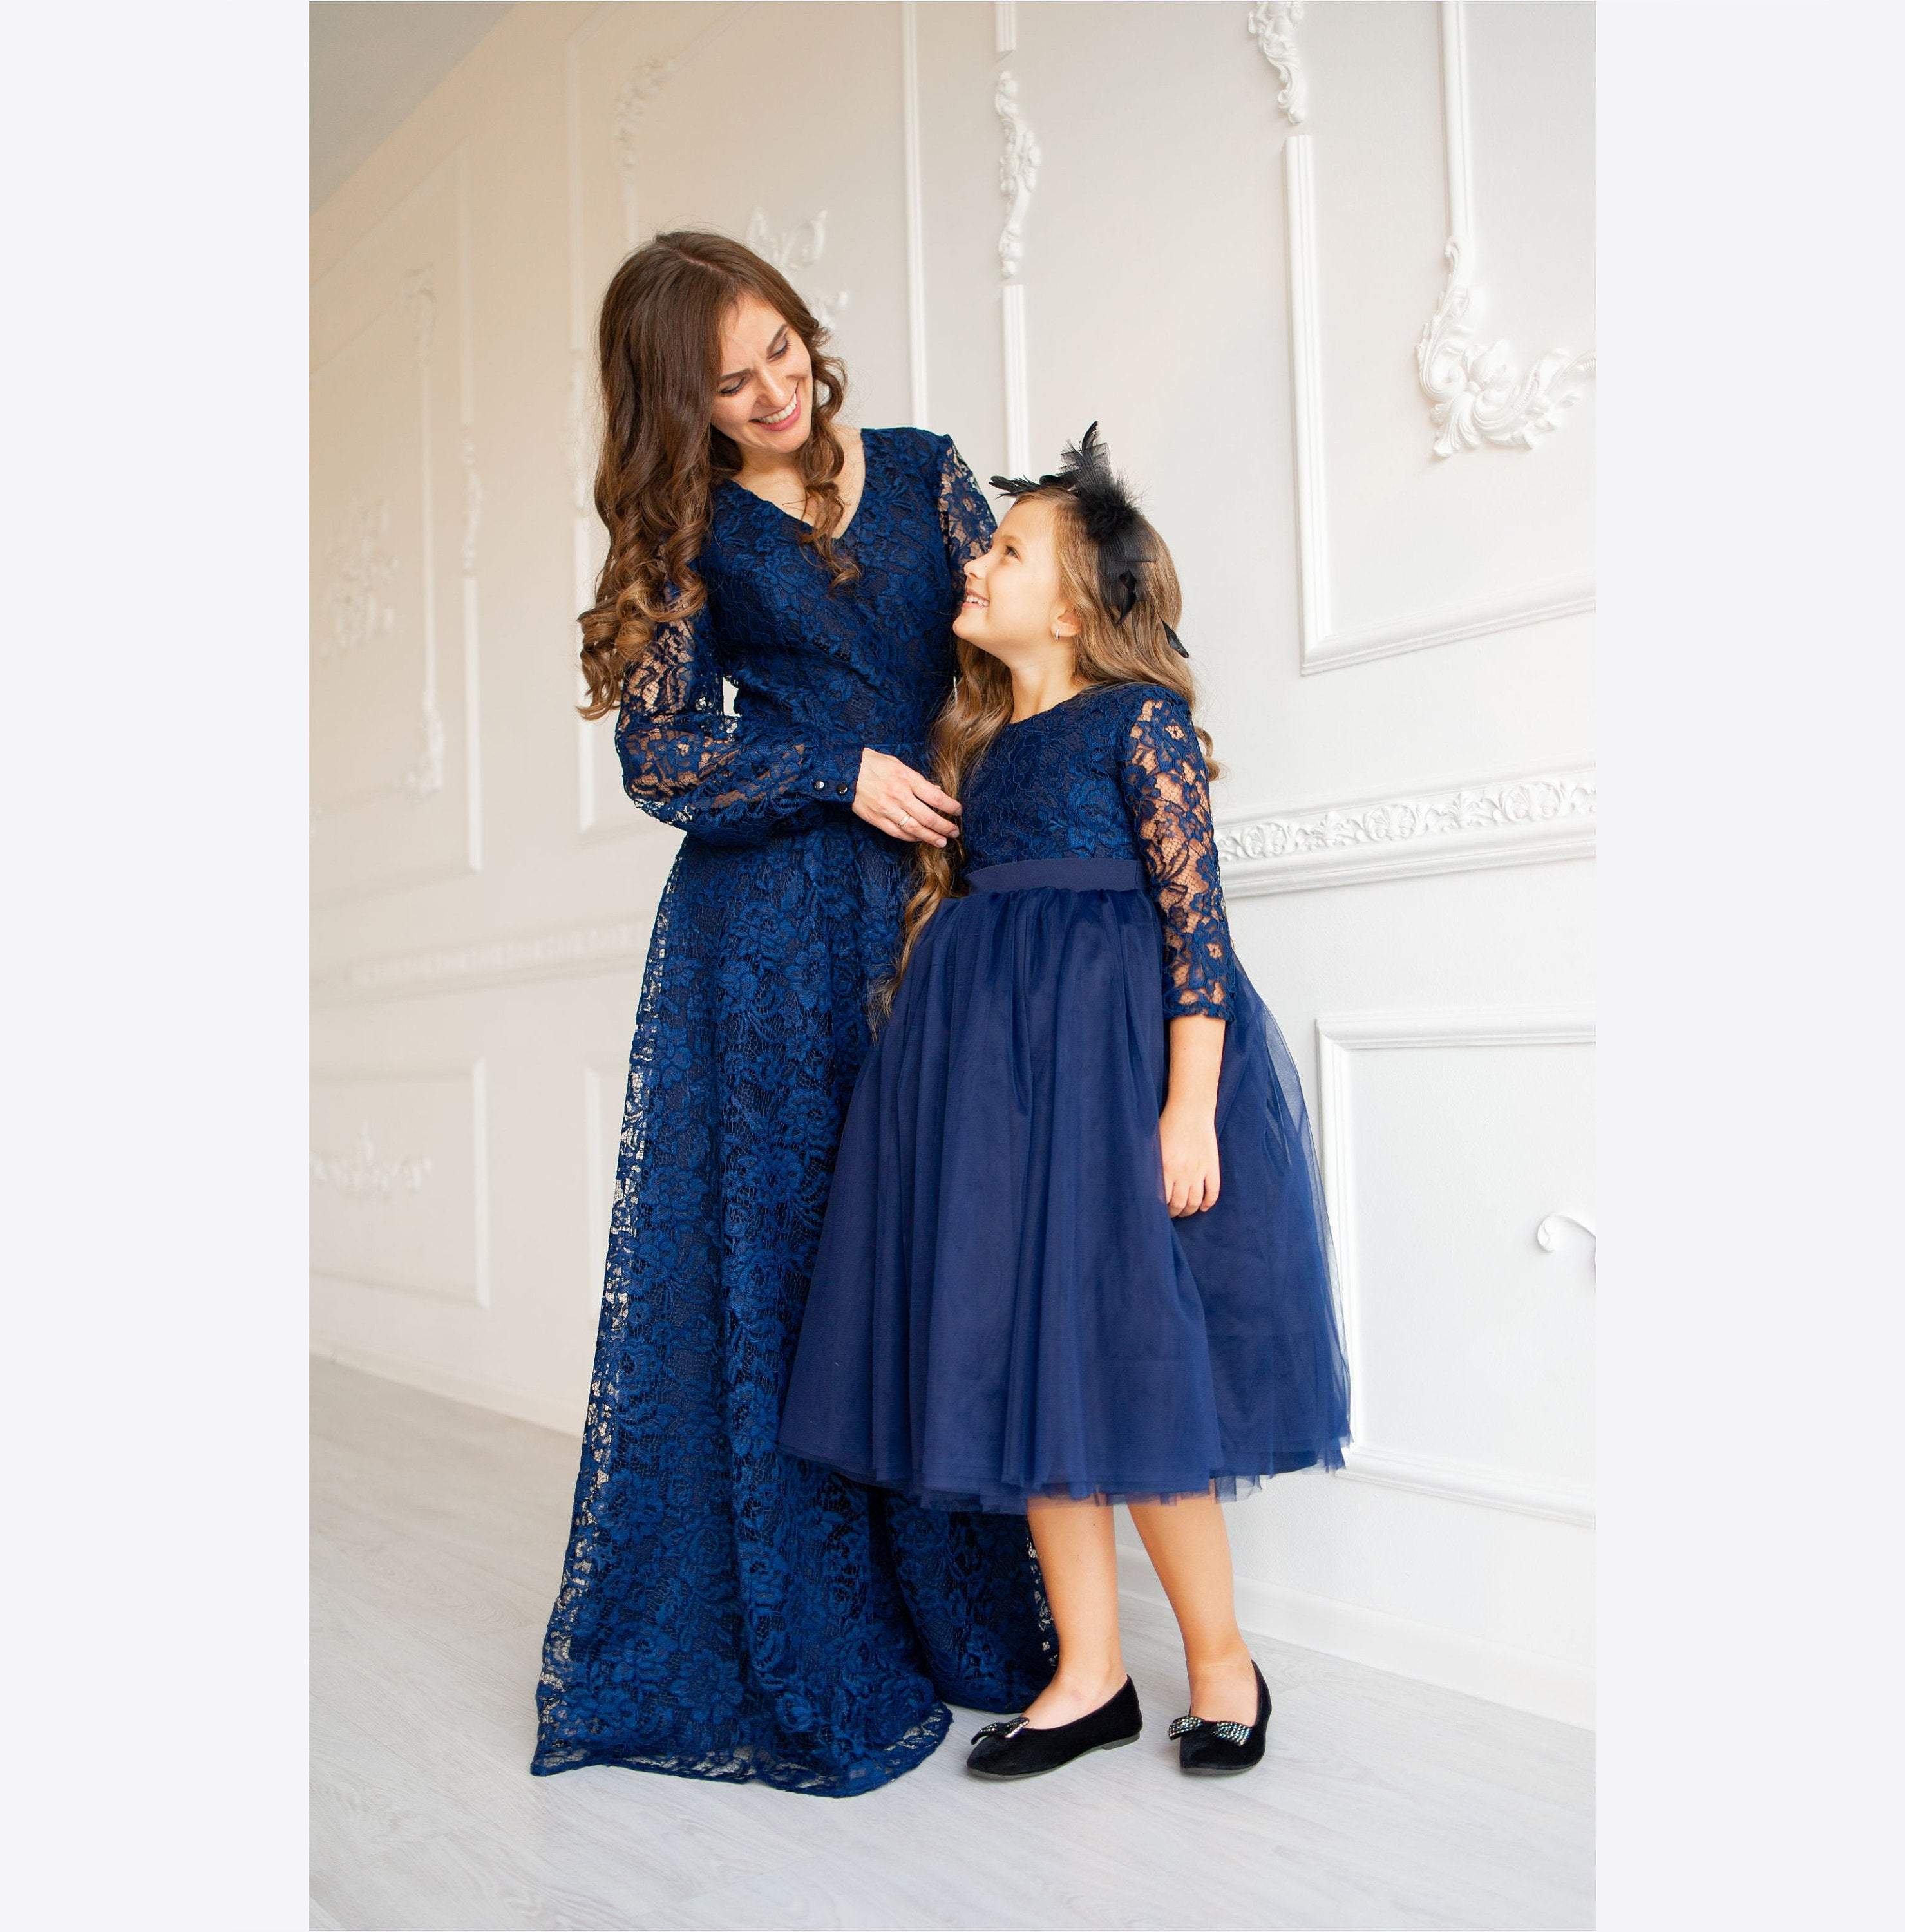 Mother & Daughter Matching Outfits Ideas | Mother daughter matching outfits,  Mother daughter dresses matching, Mother daughter dress